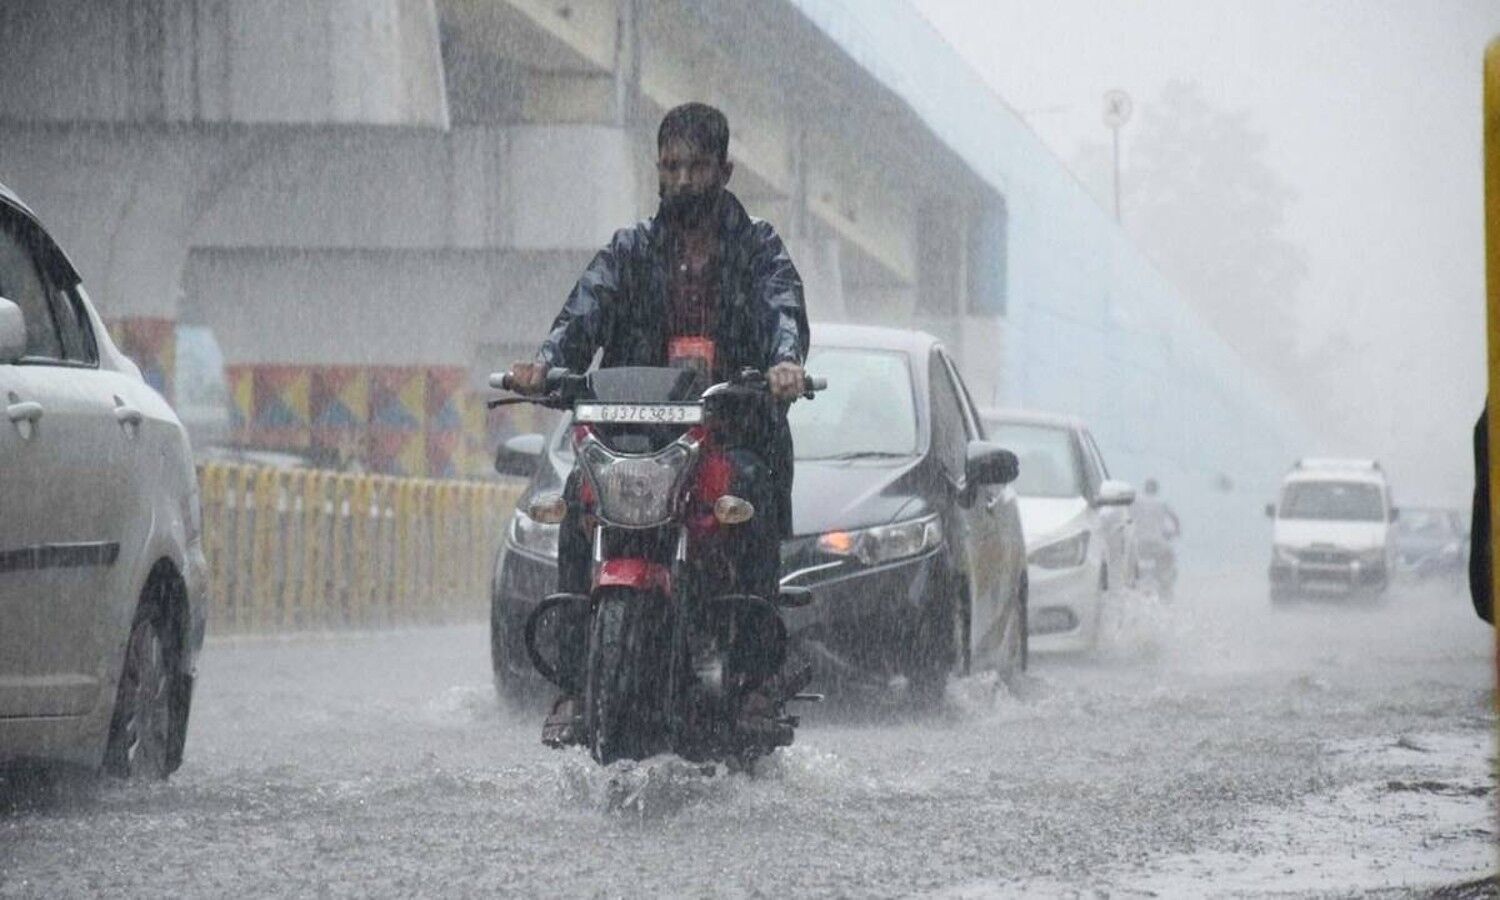 Heavy Rain Today: Alert issued for heavy rain, water will fall in these districts with lightning